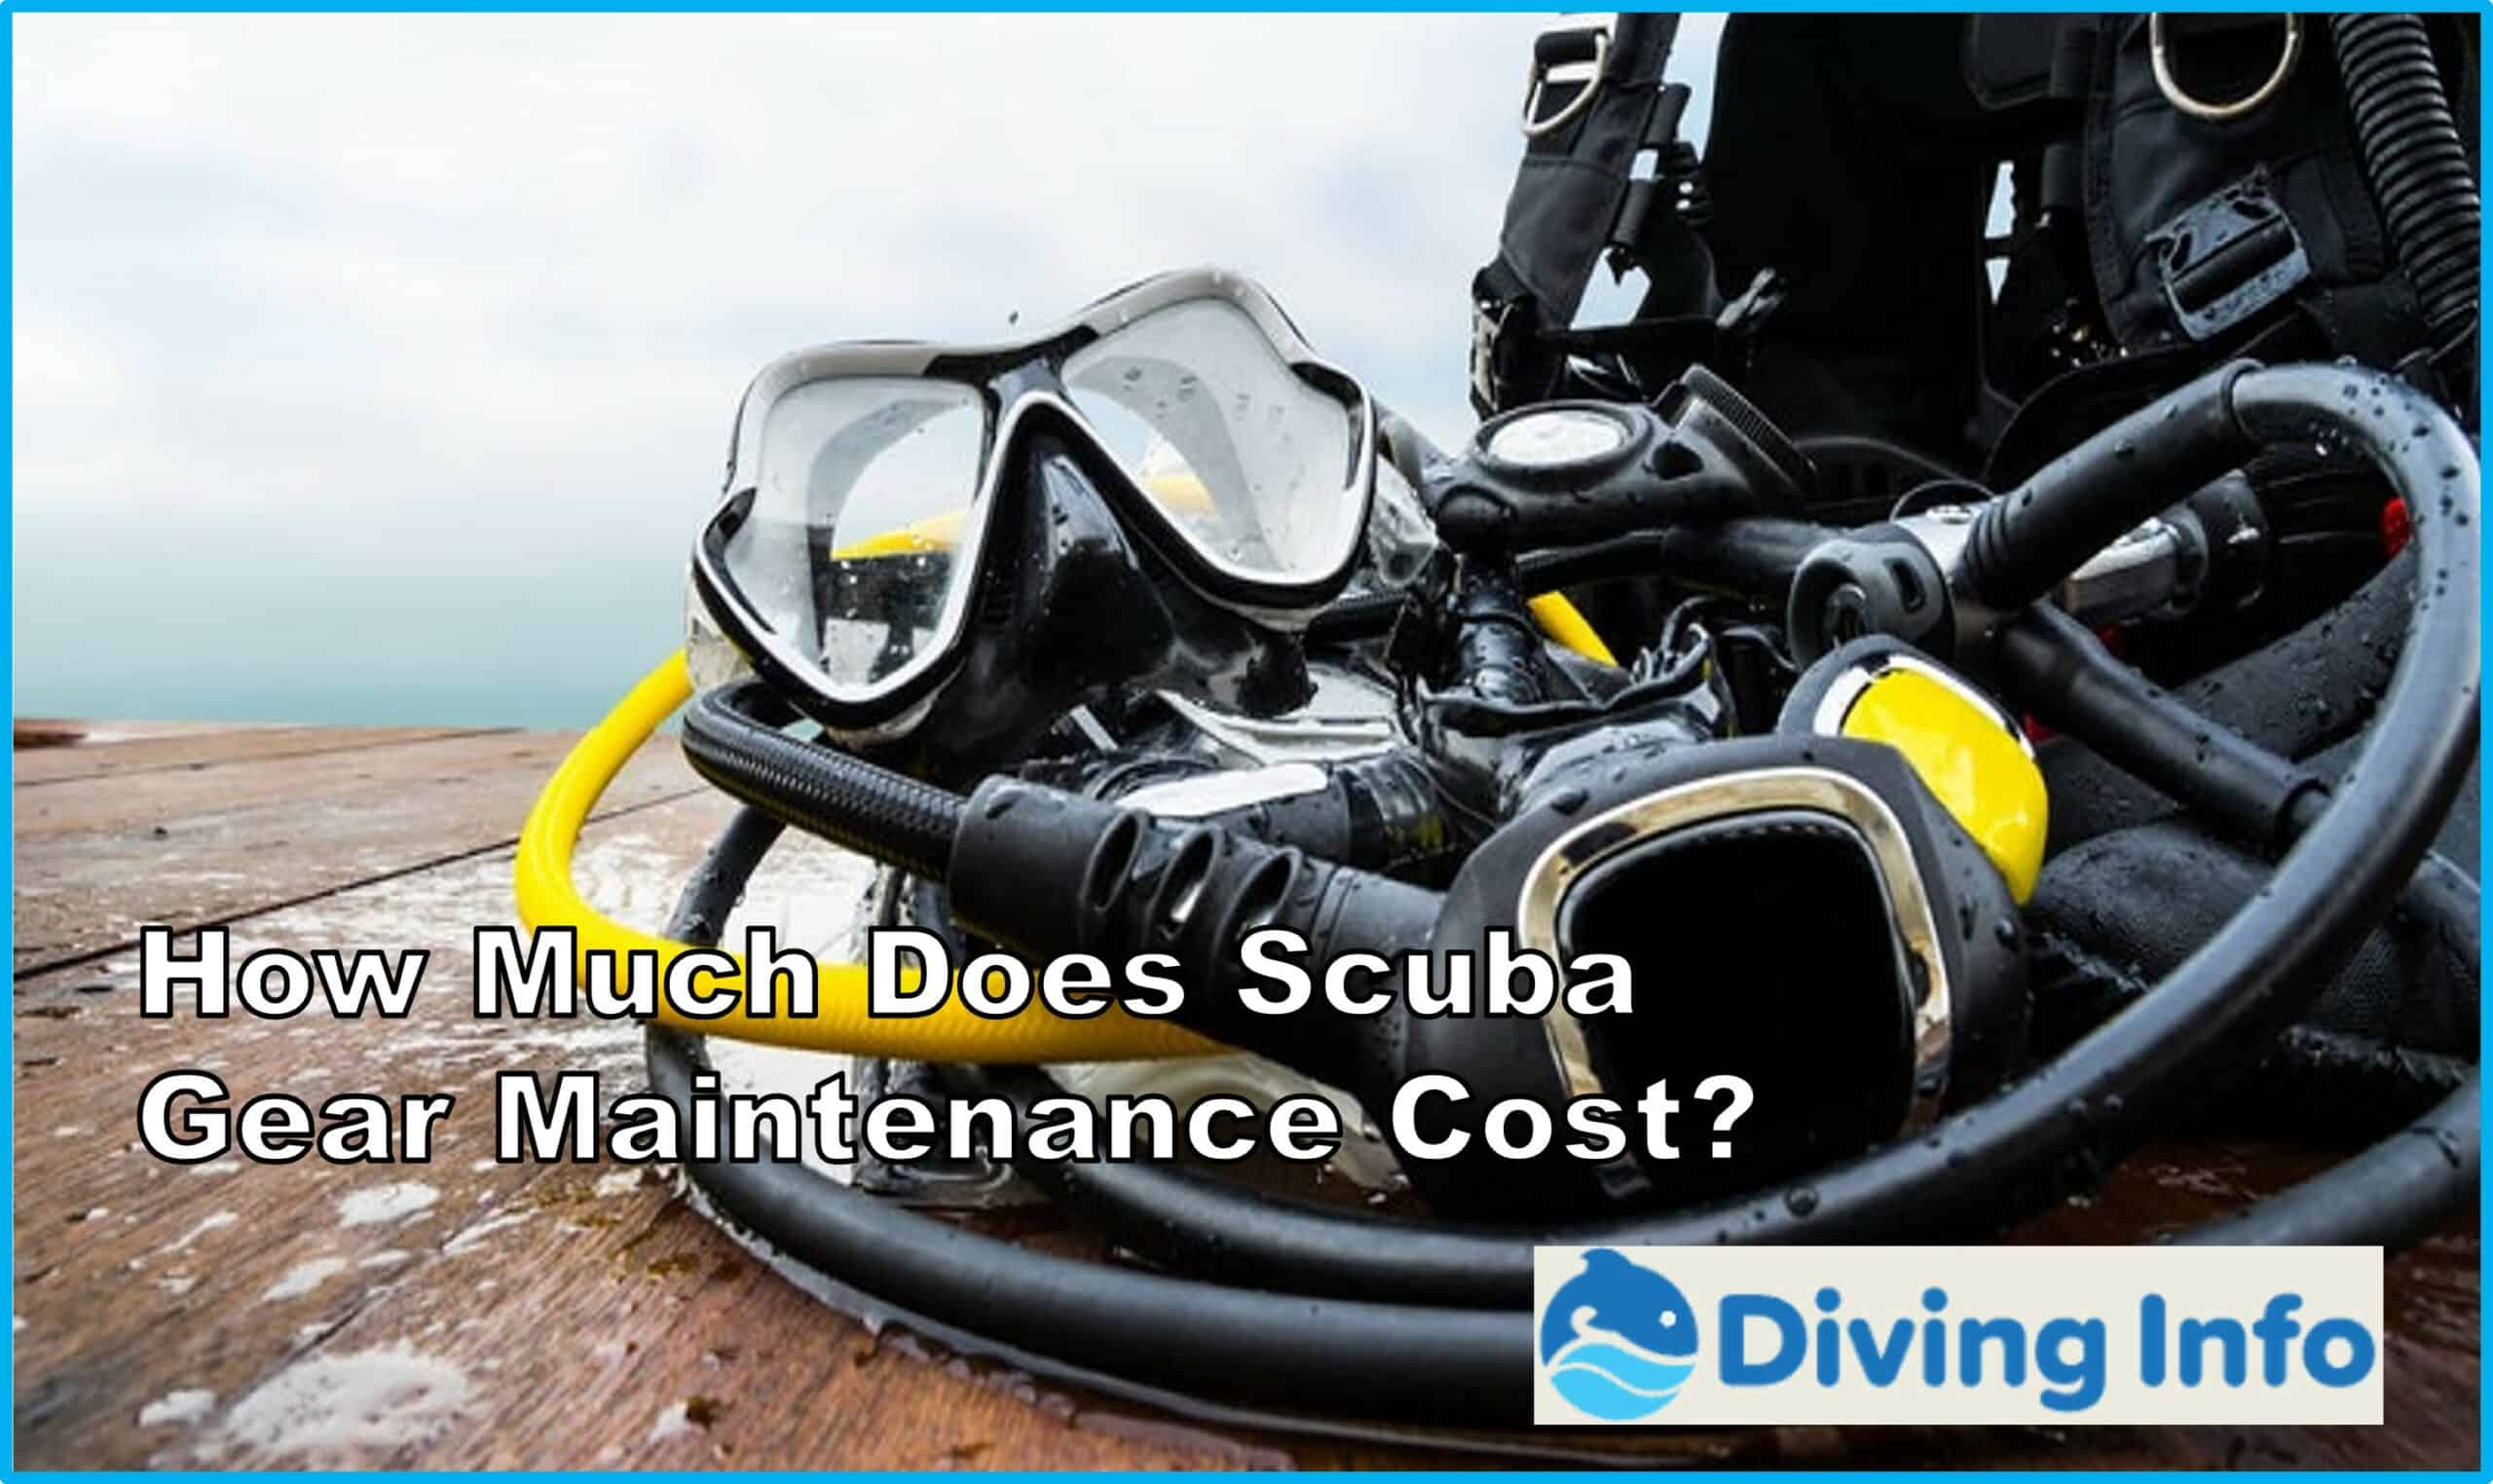 How Much Does Scuba Gear Maintenance Cost